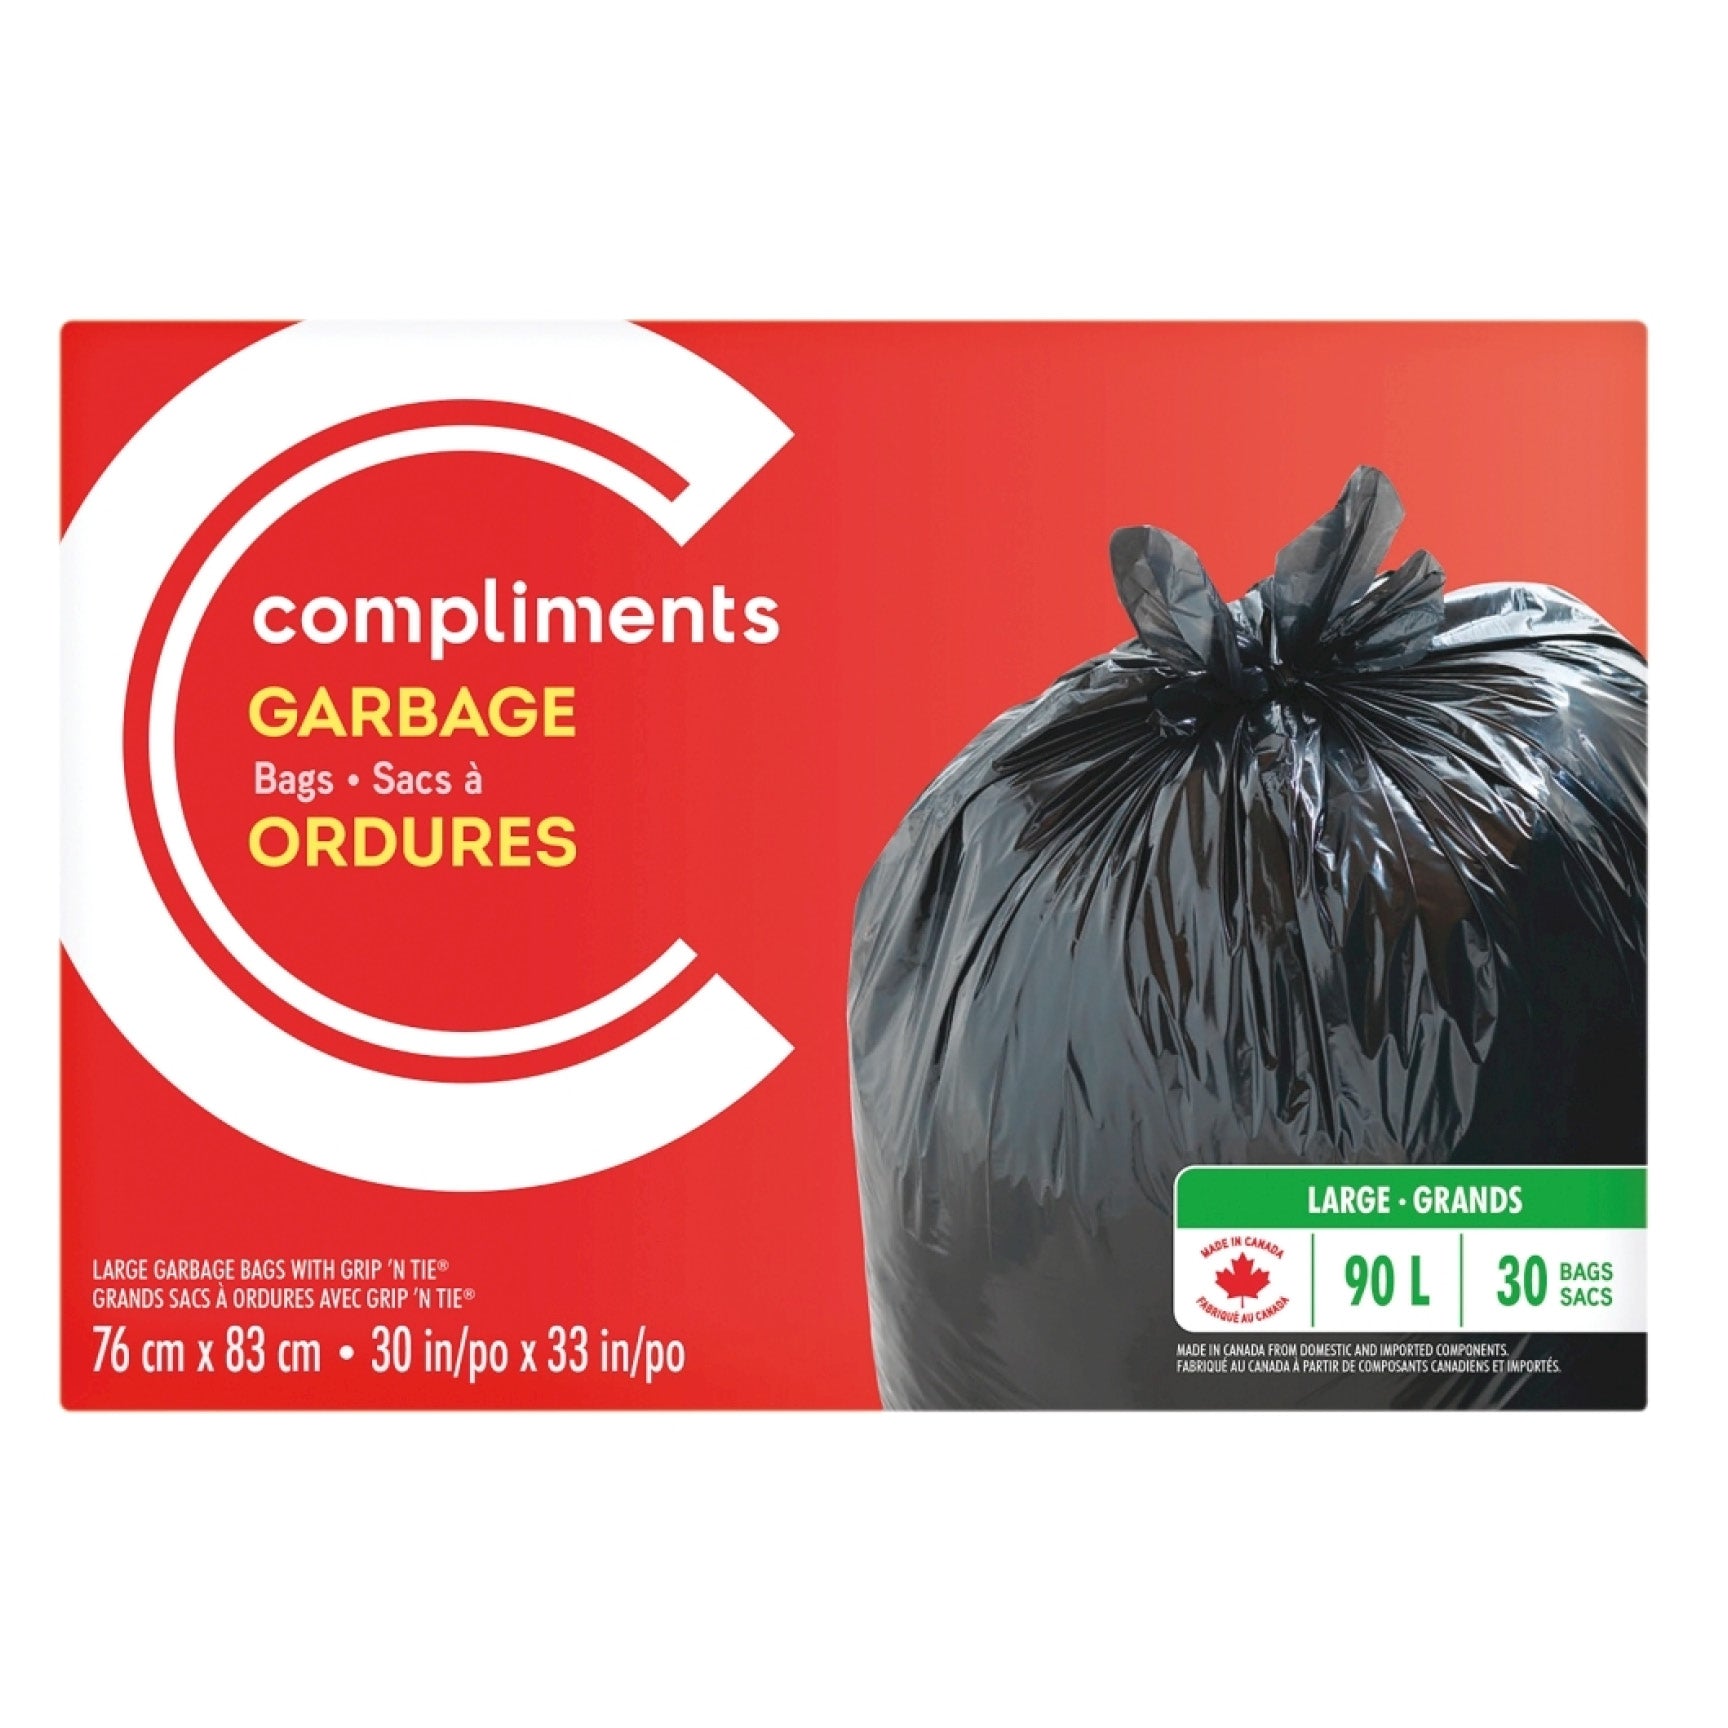 Compliments Garbage Bags, 90L Grip & Tie, 30 bags